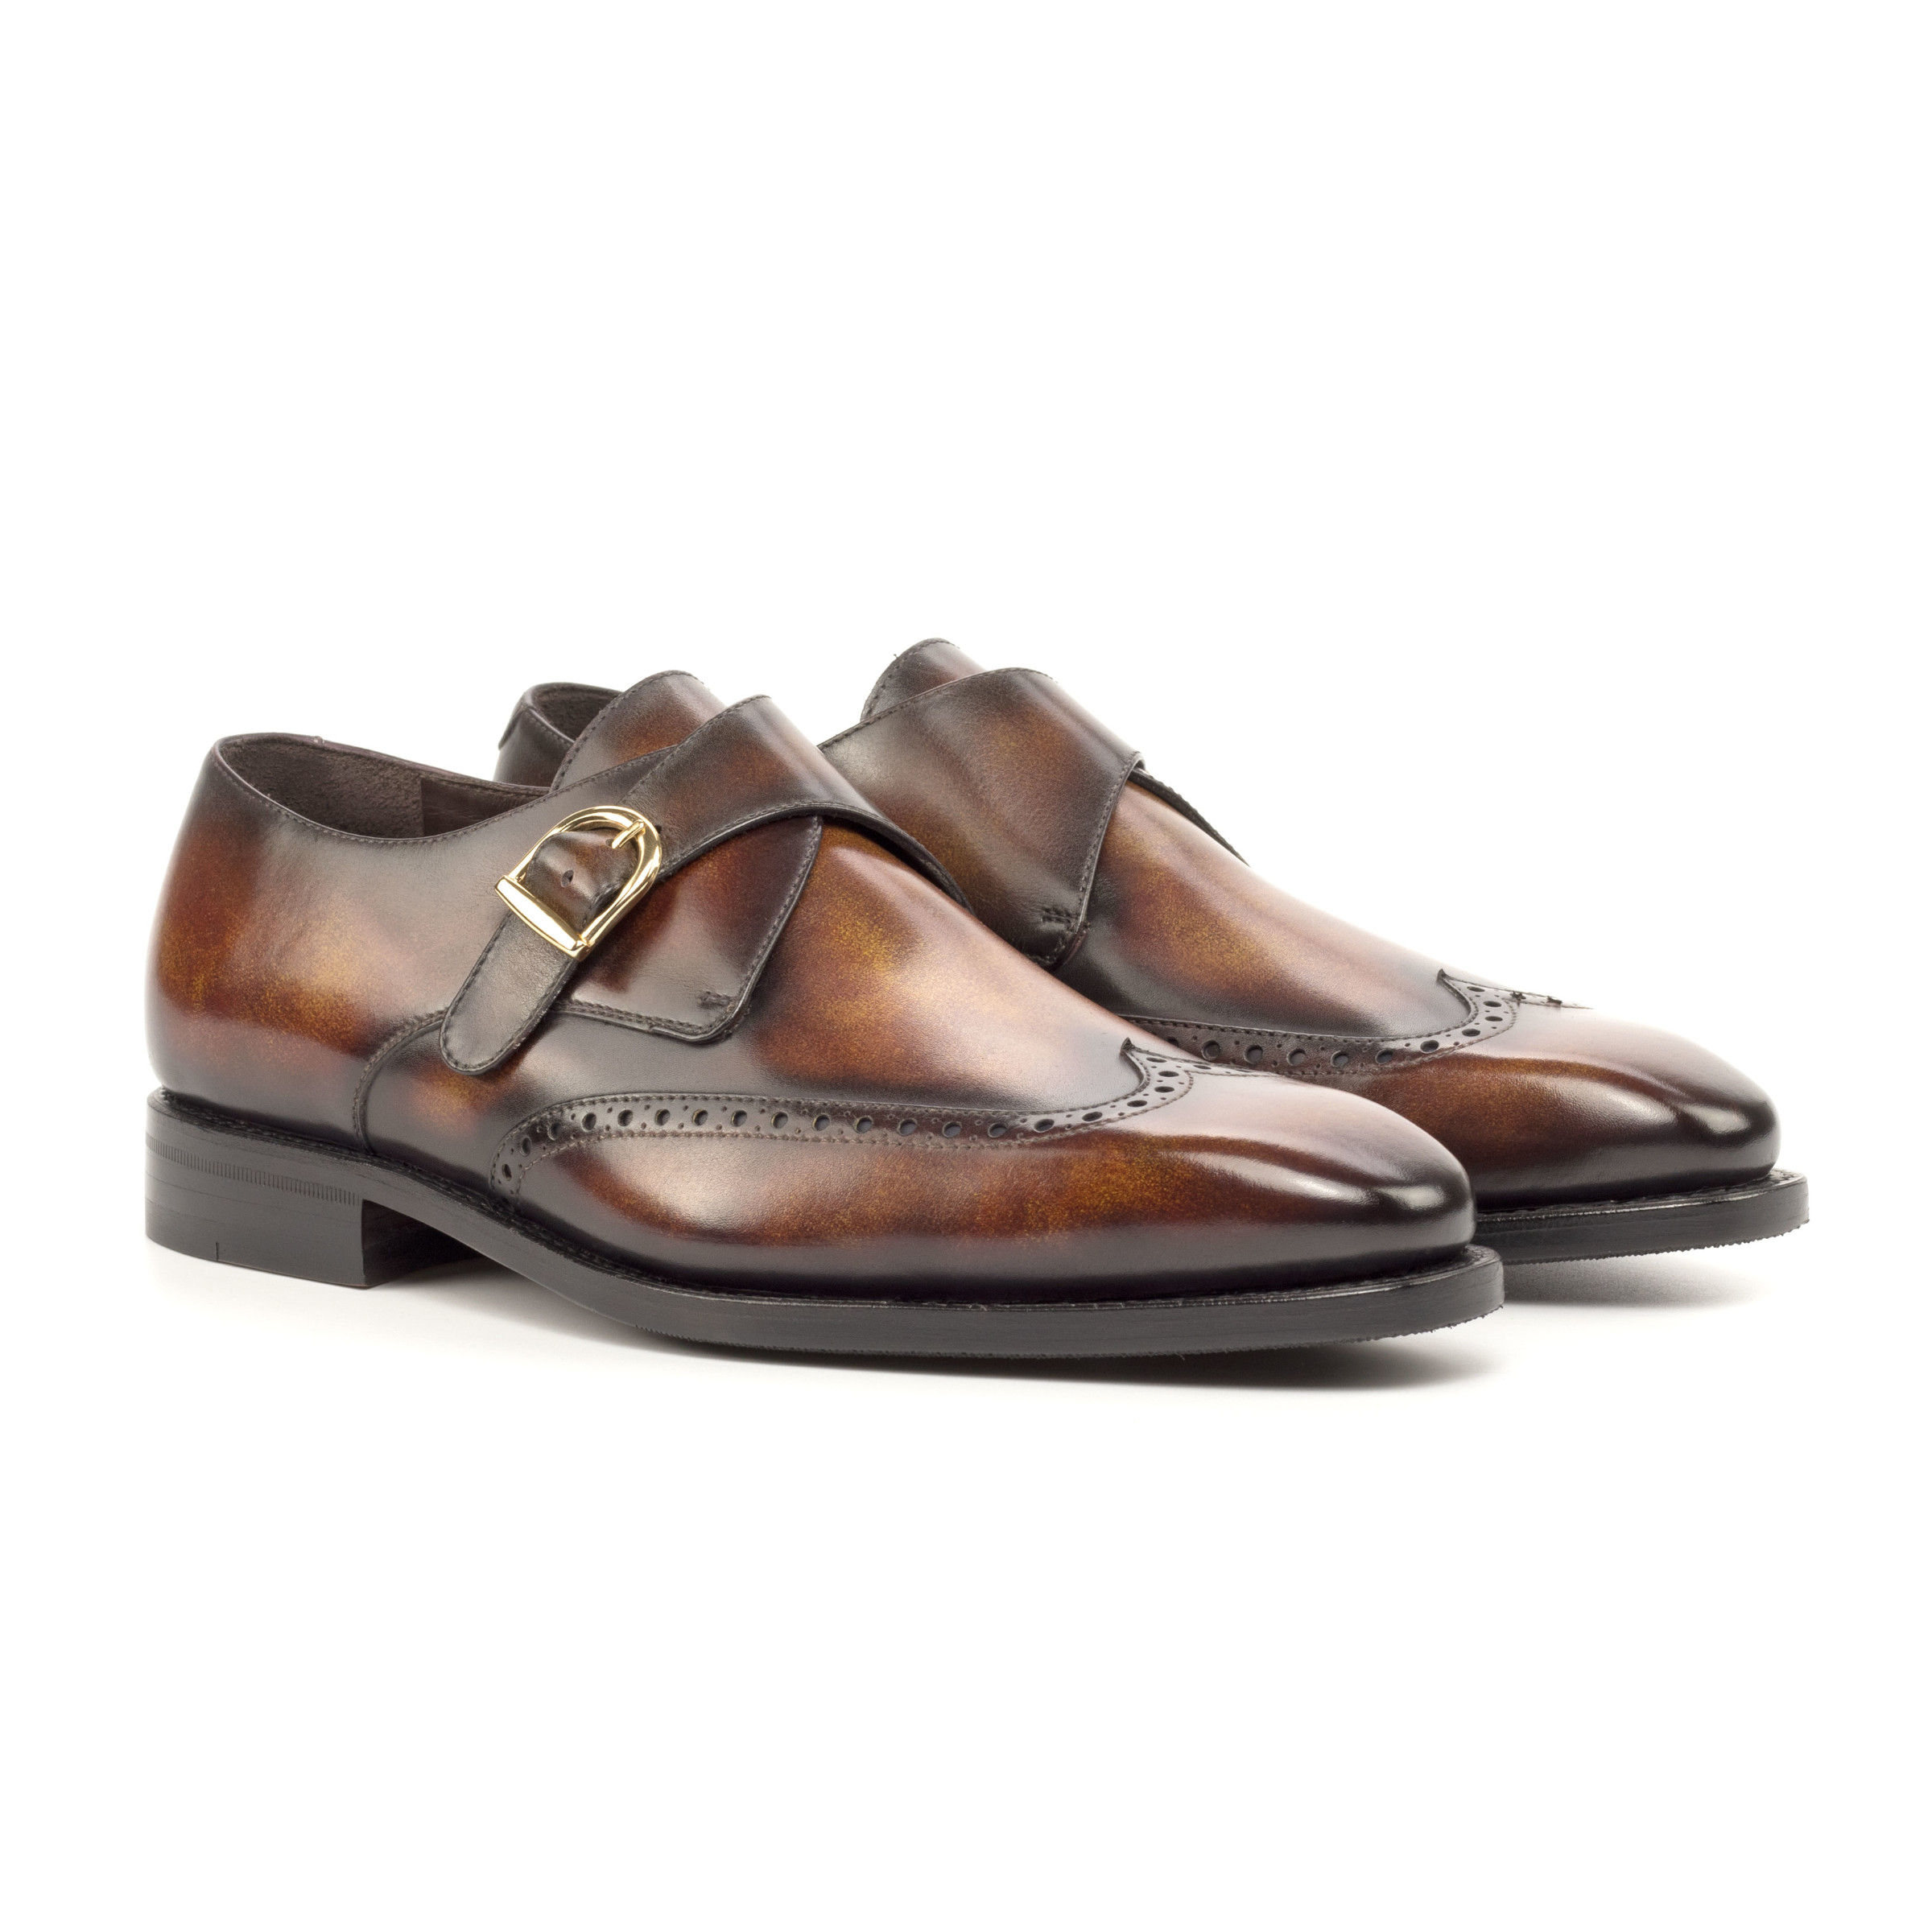 The Abbot: Fire Patina Brogue. Single monkstrap brogue shoes in fire brown patina.